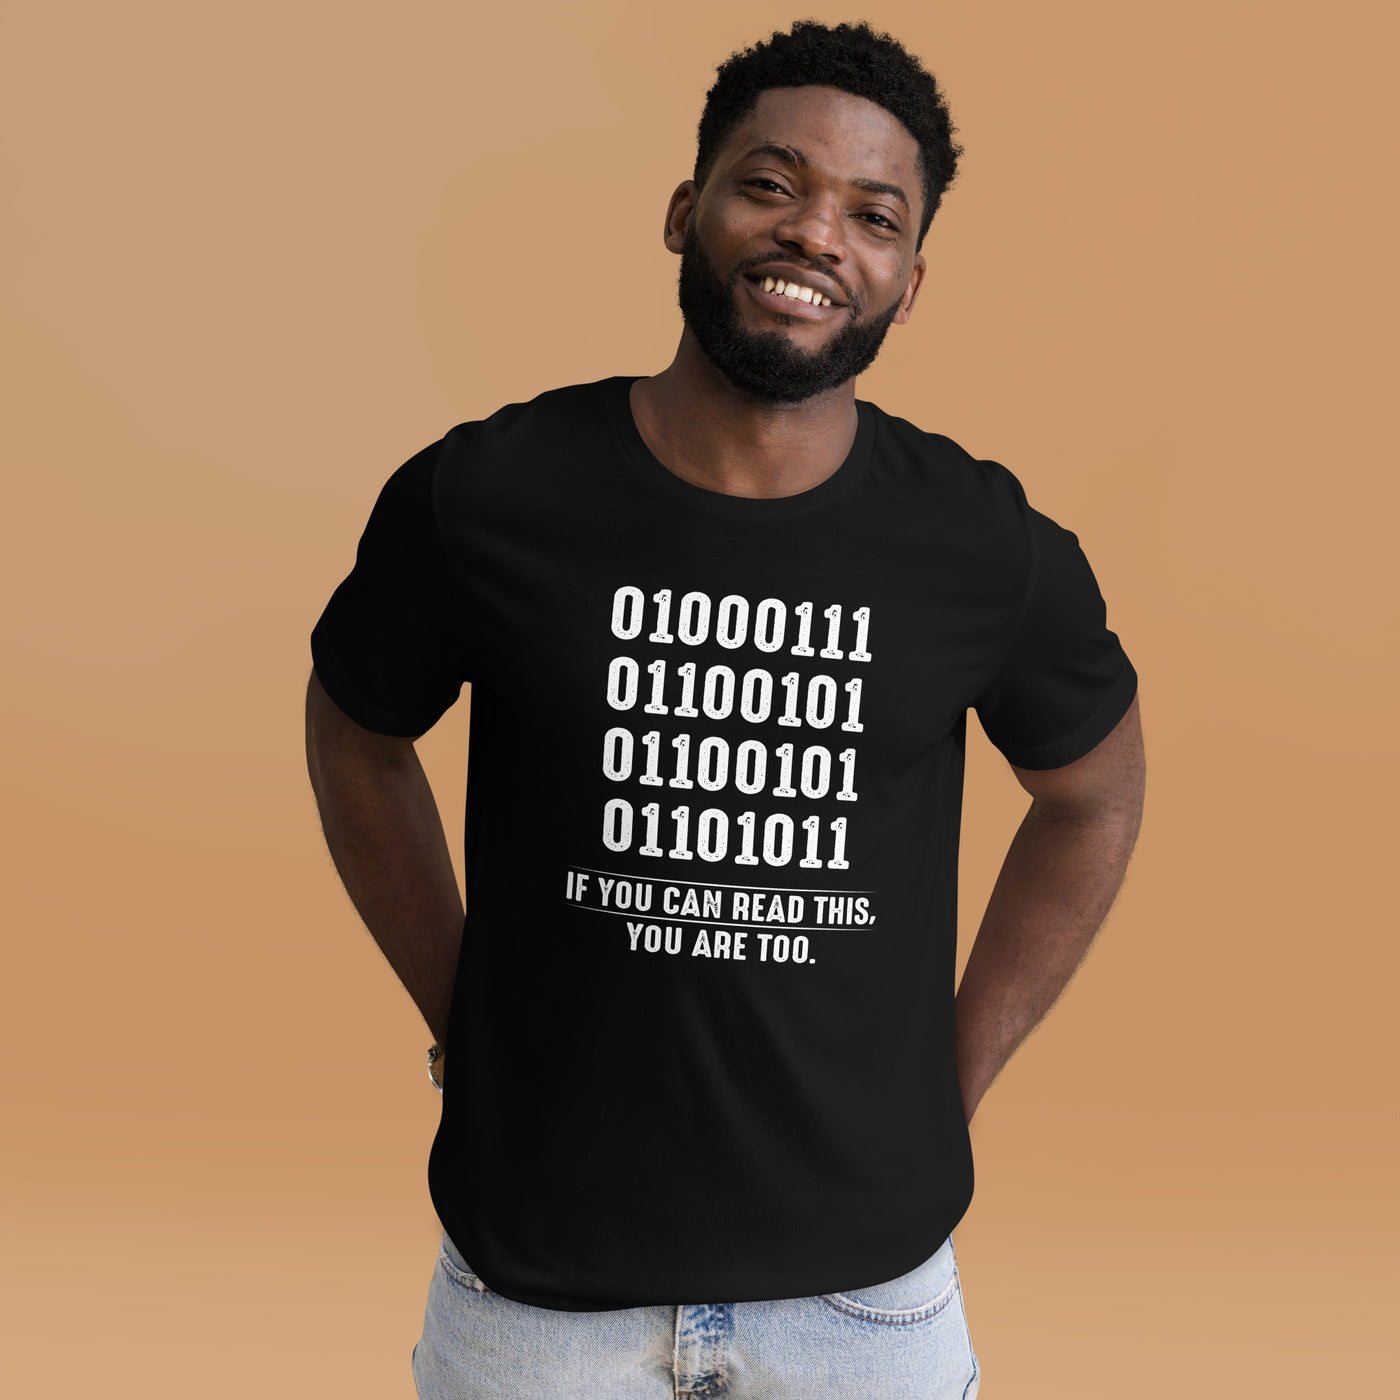 If you can read this, you are too - Unisex t-shirt